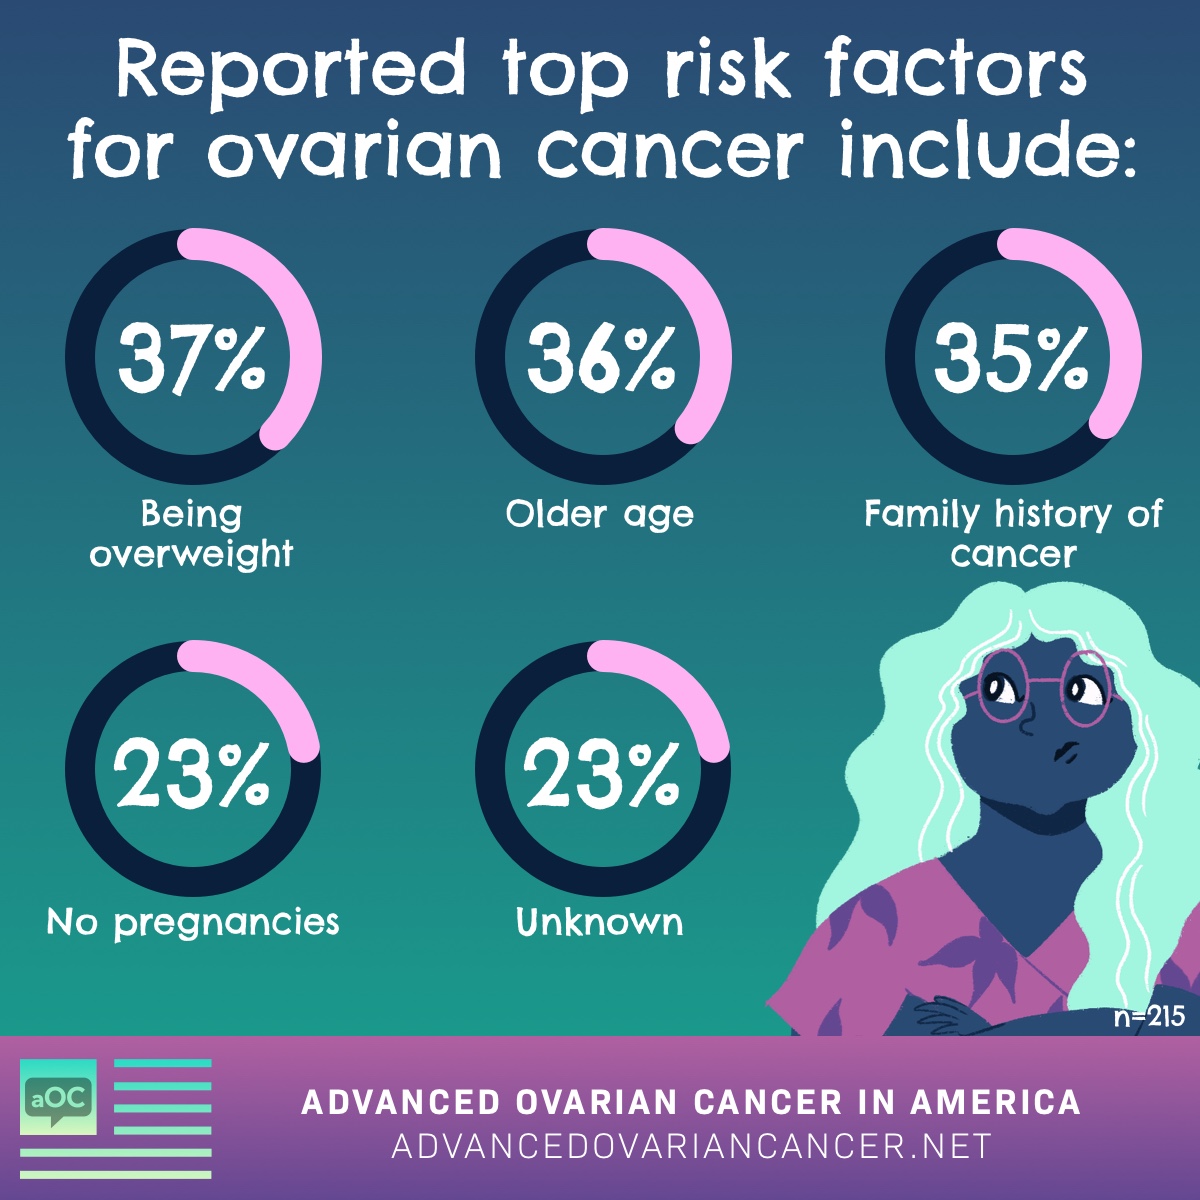 Reported top risk factors for ovarian cancer include being overweight (37%), older age (36%), family history (35%), never been pregnant (23%), I don’t know (23%)